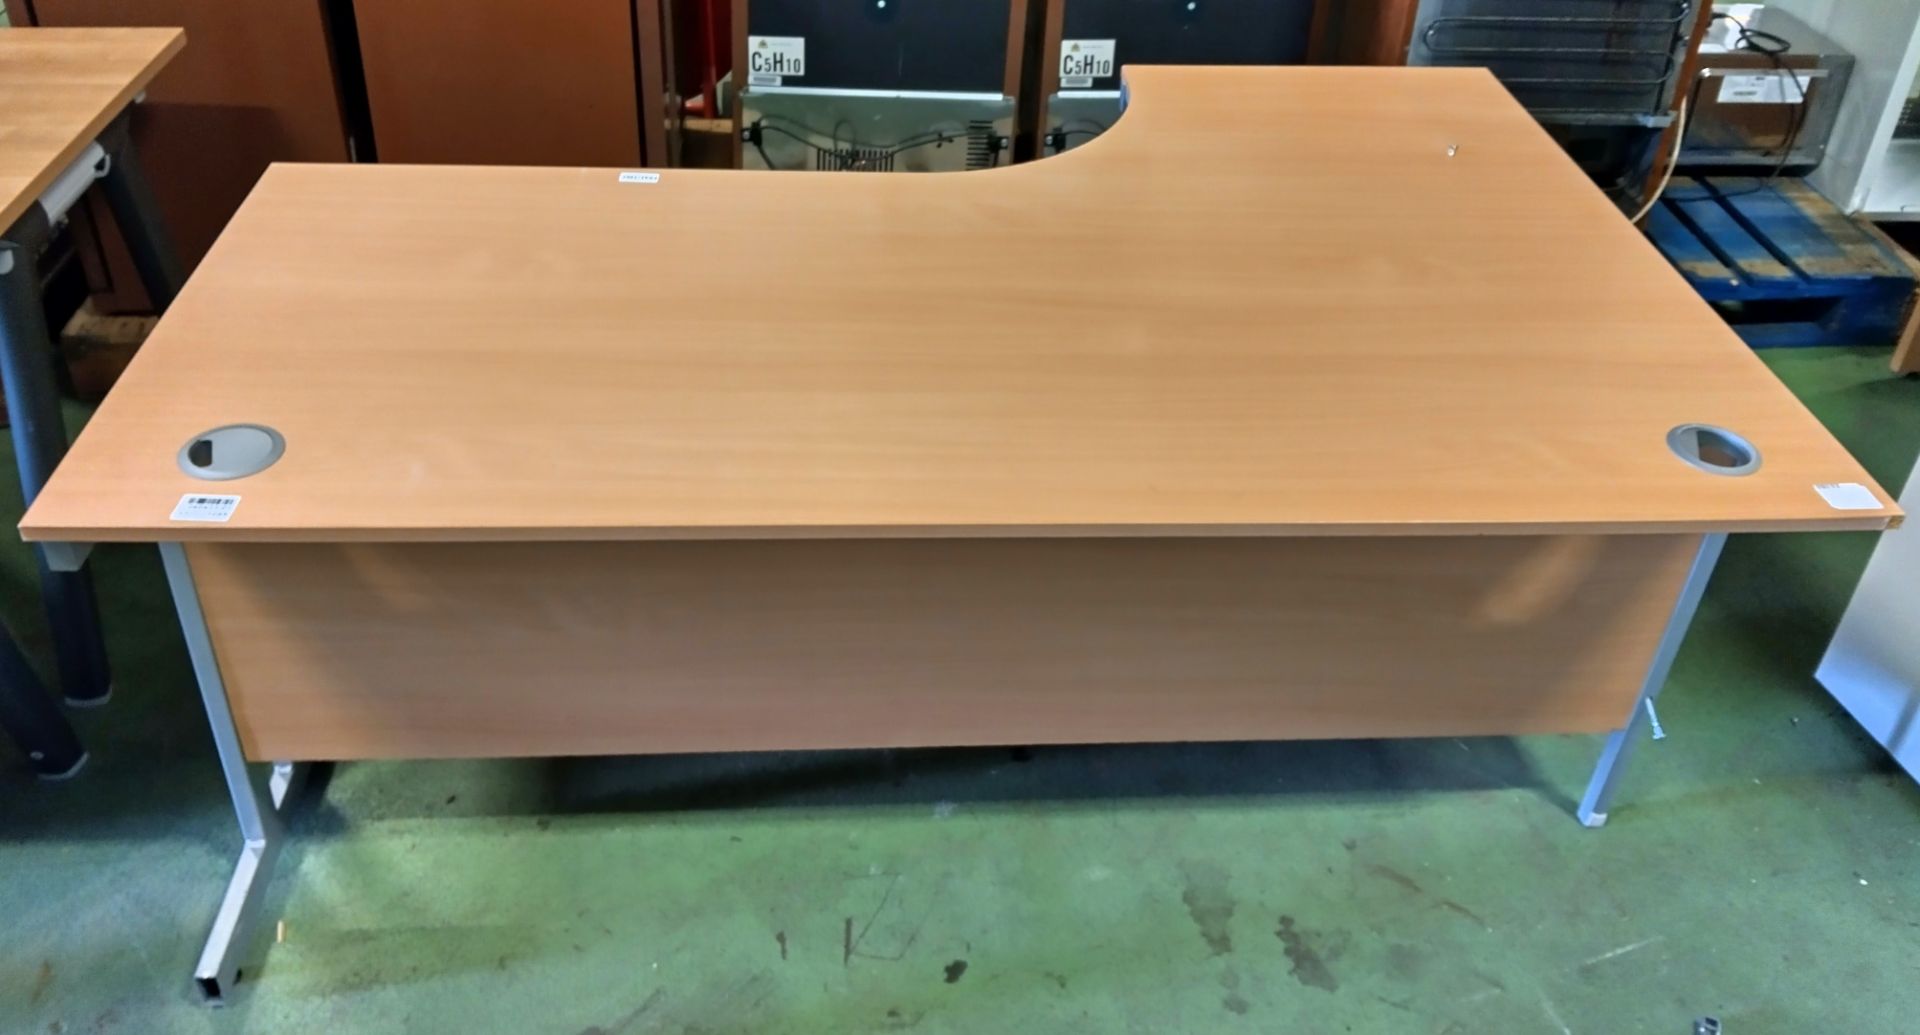 Large curved wooden office scoop desk - L 1800 x W 800 x H 730